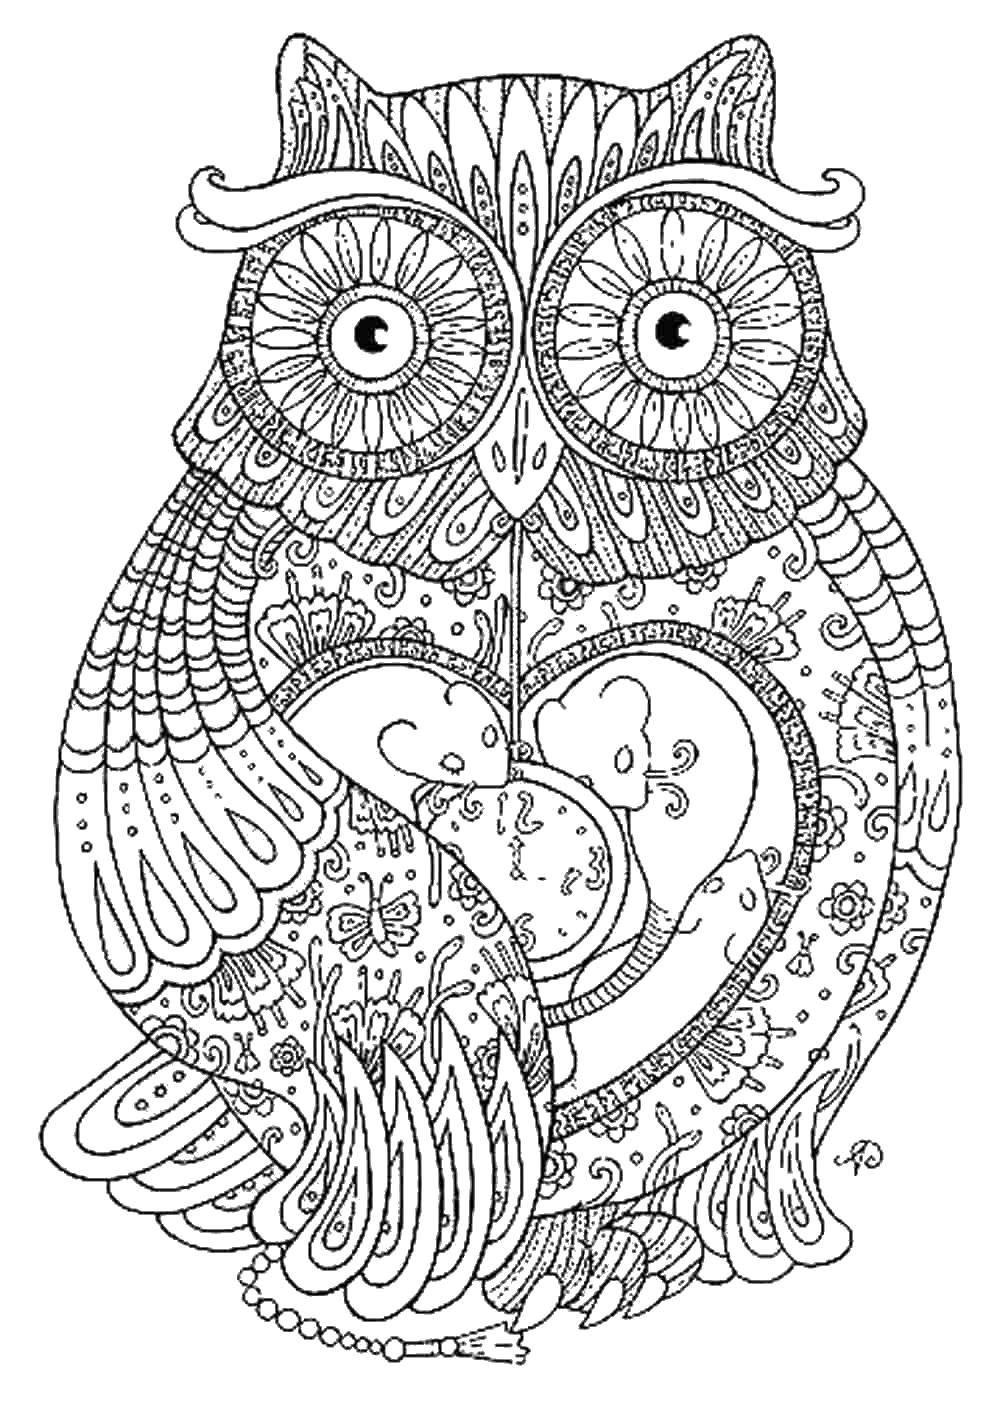 Coloring The owl is covered with patterns. Category For teenagers. Tags:  Bathroom with shower.